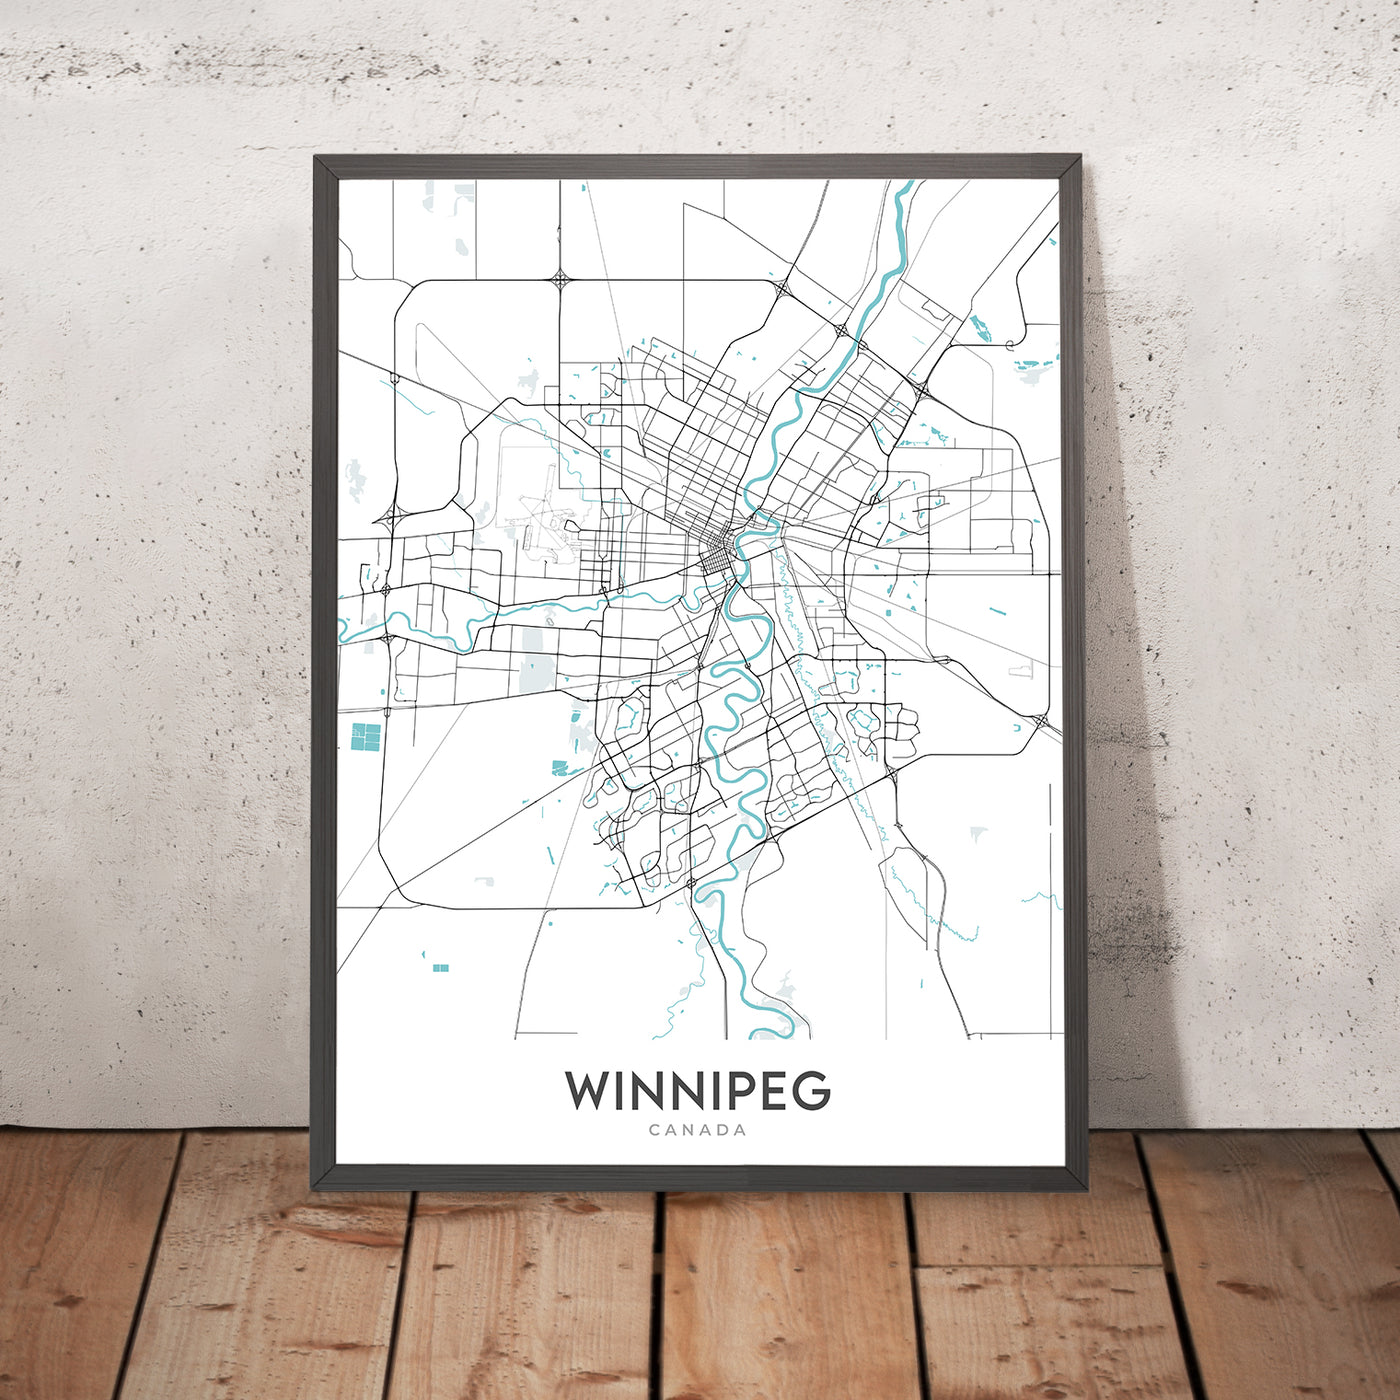 Modern City Map of Winnipeg, Canada: Downtown, St. Boniface, The Forks, Canadian Museum for Human Rights, Manitoba Museum